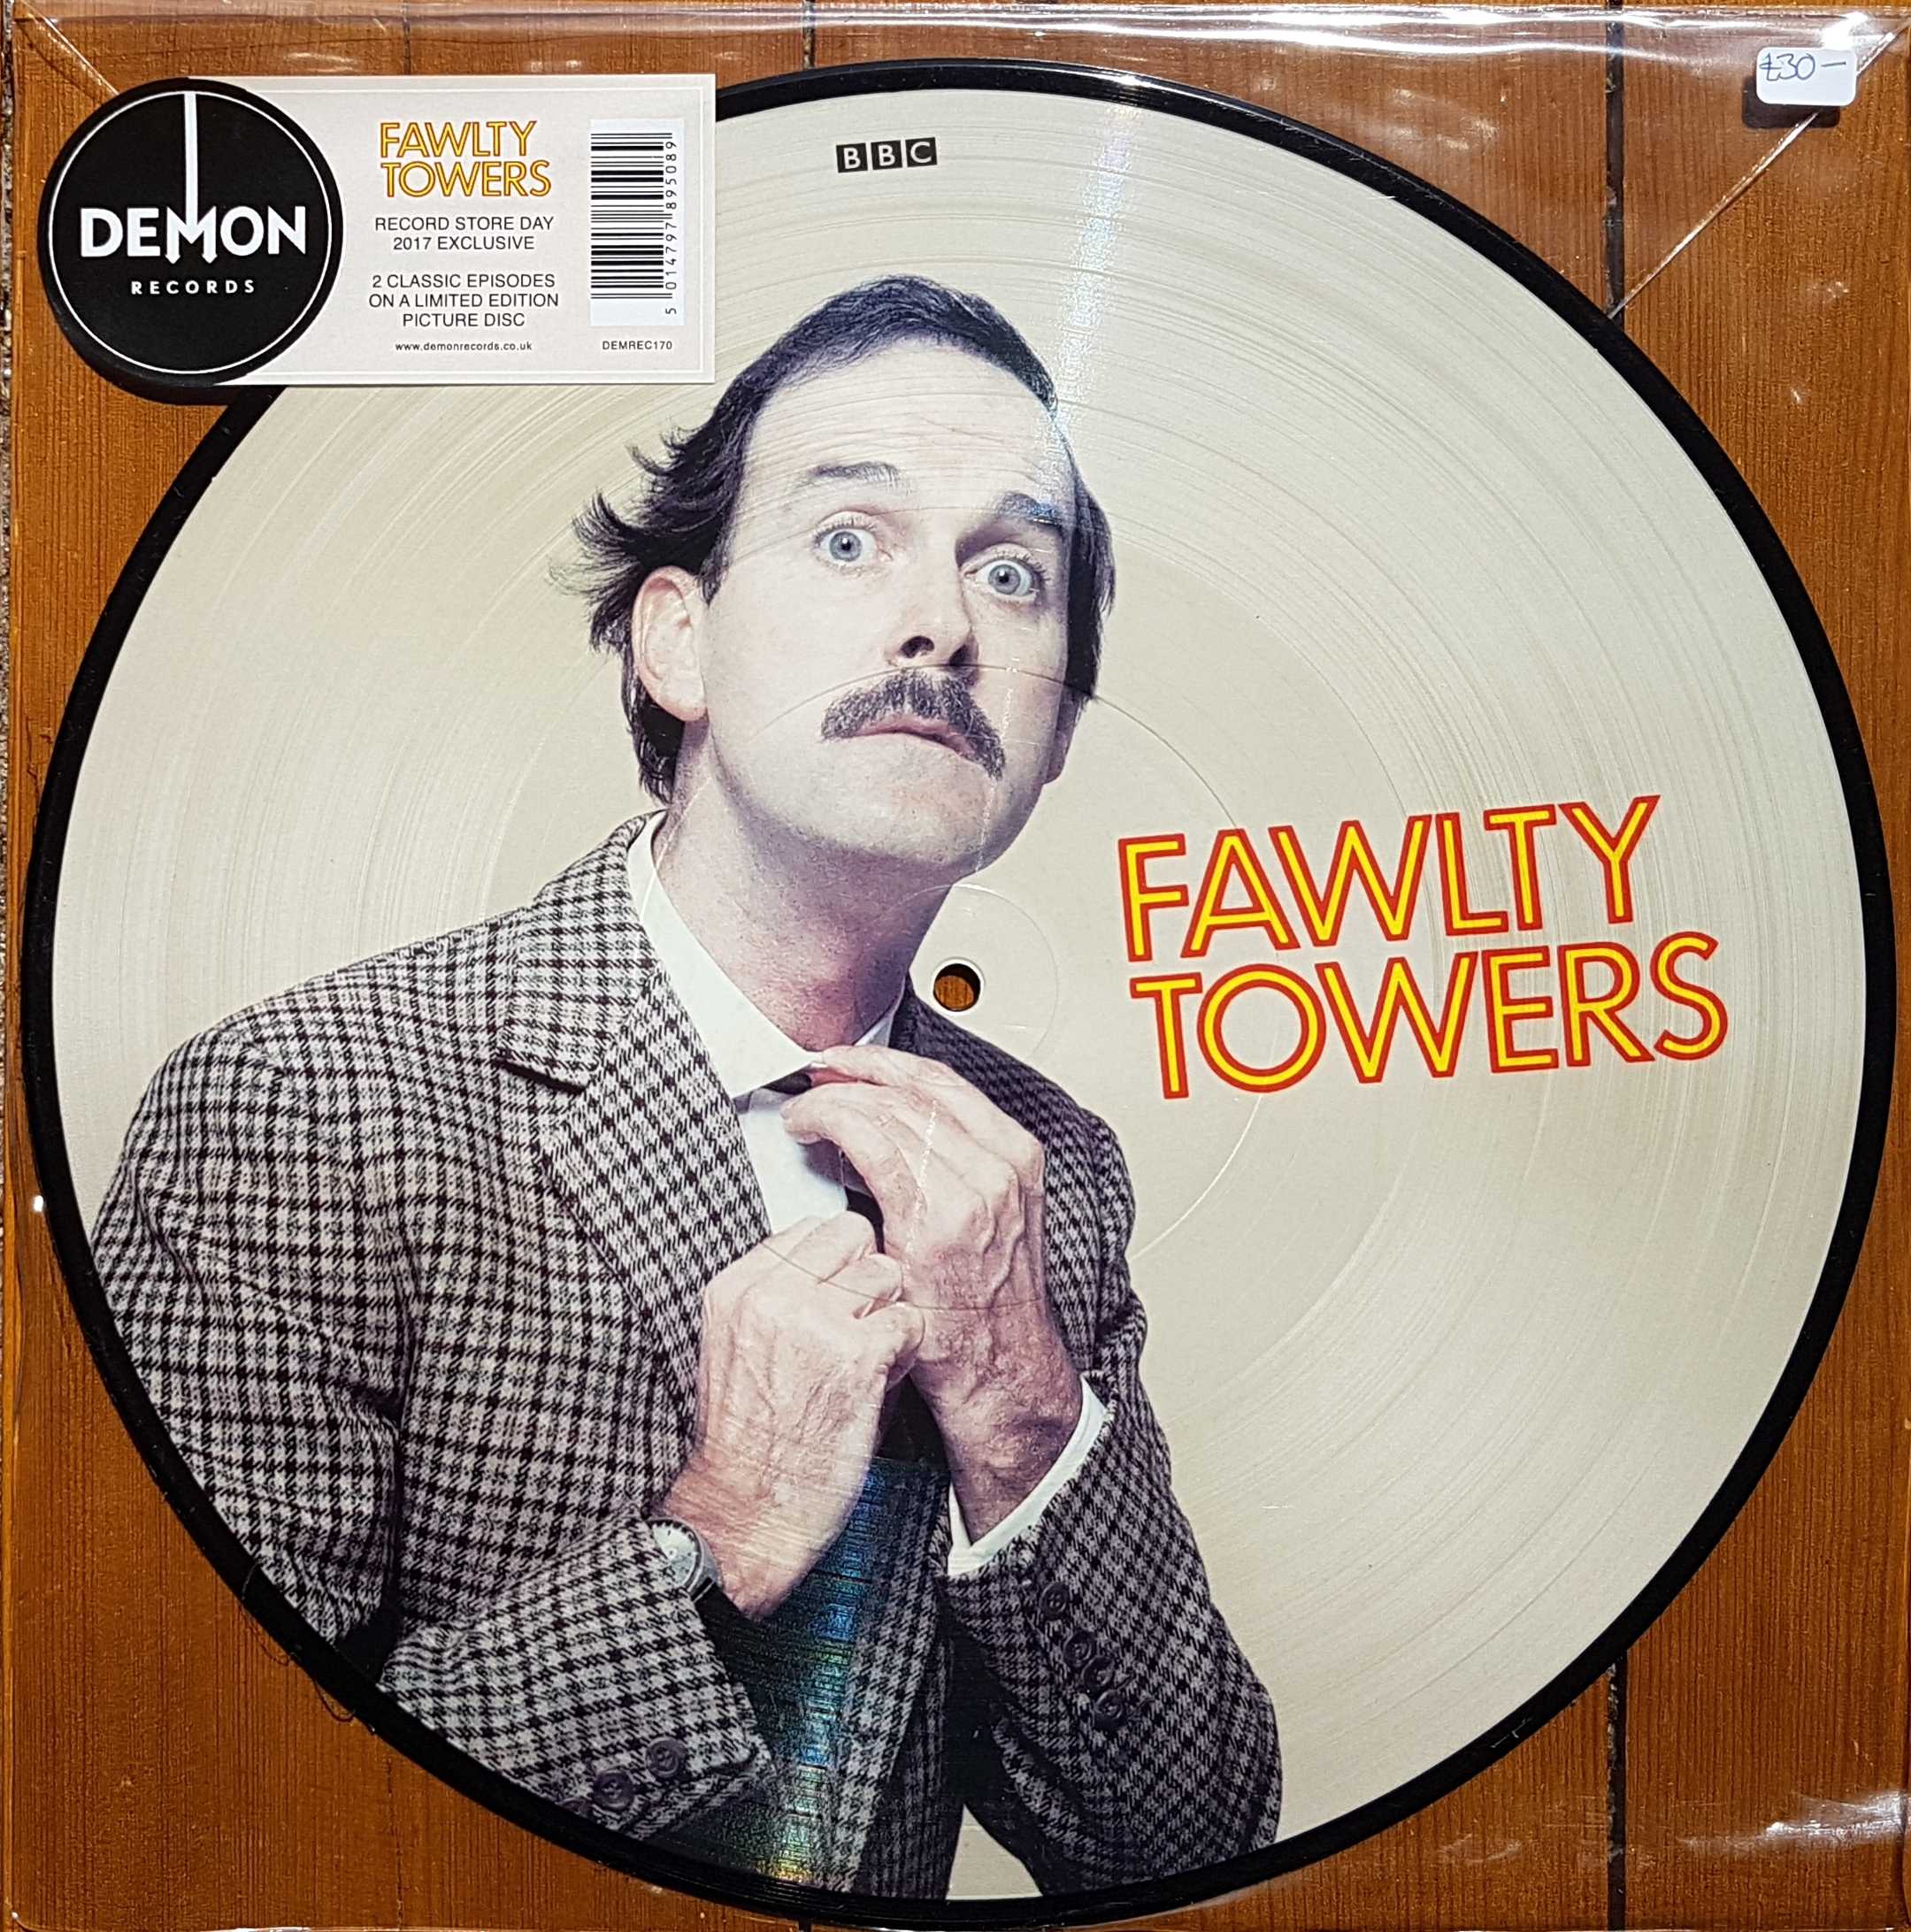 Picture of Fawlty towers by artist John Cleese / Connie Booth from the BBC albums - Records and Tapes library